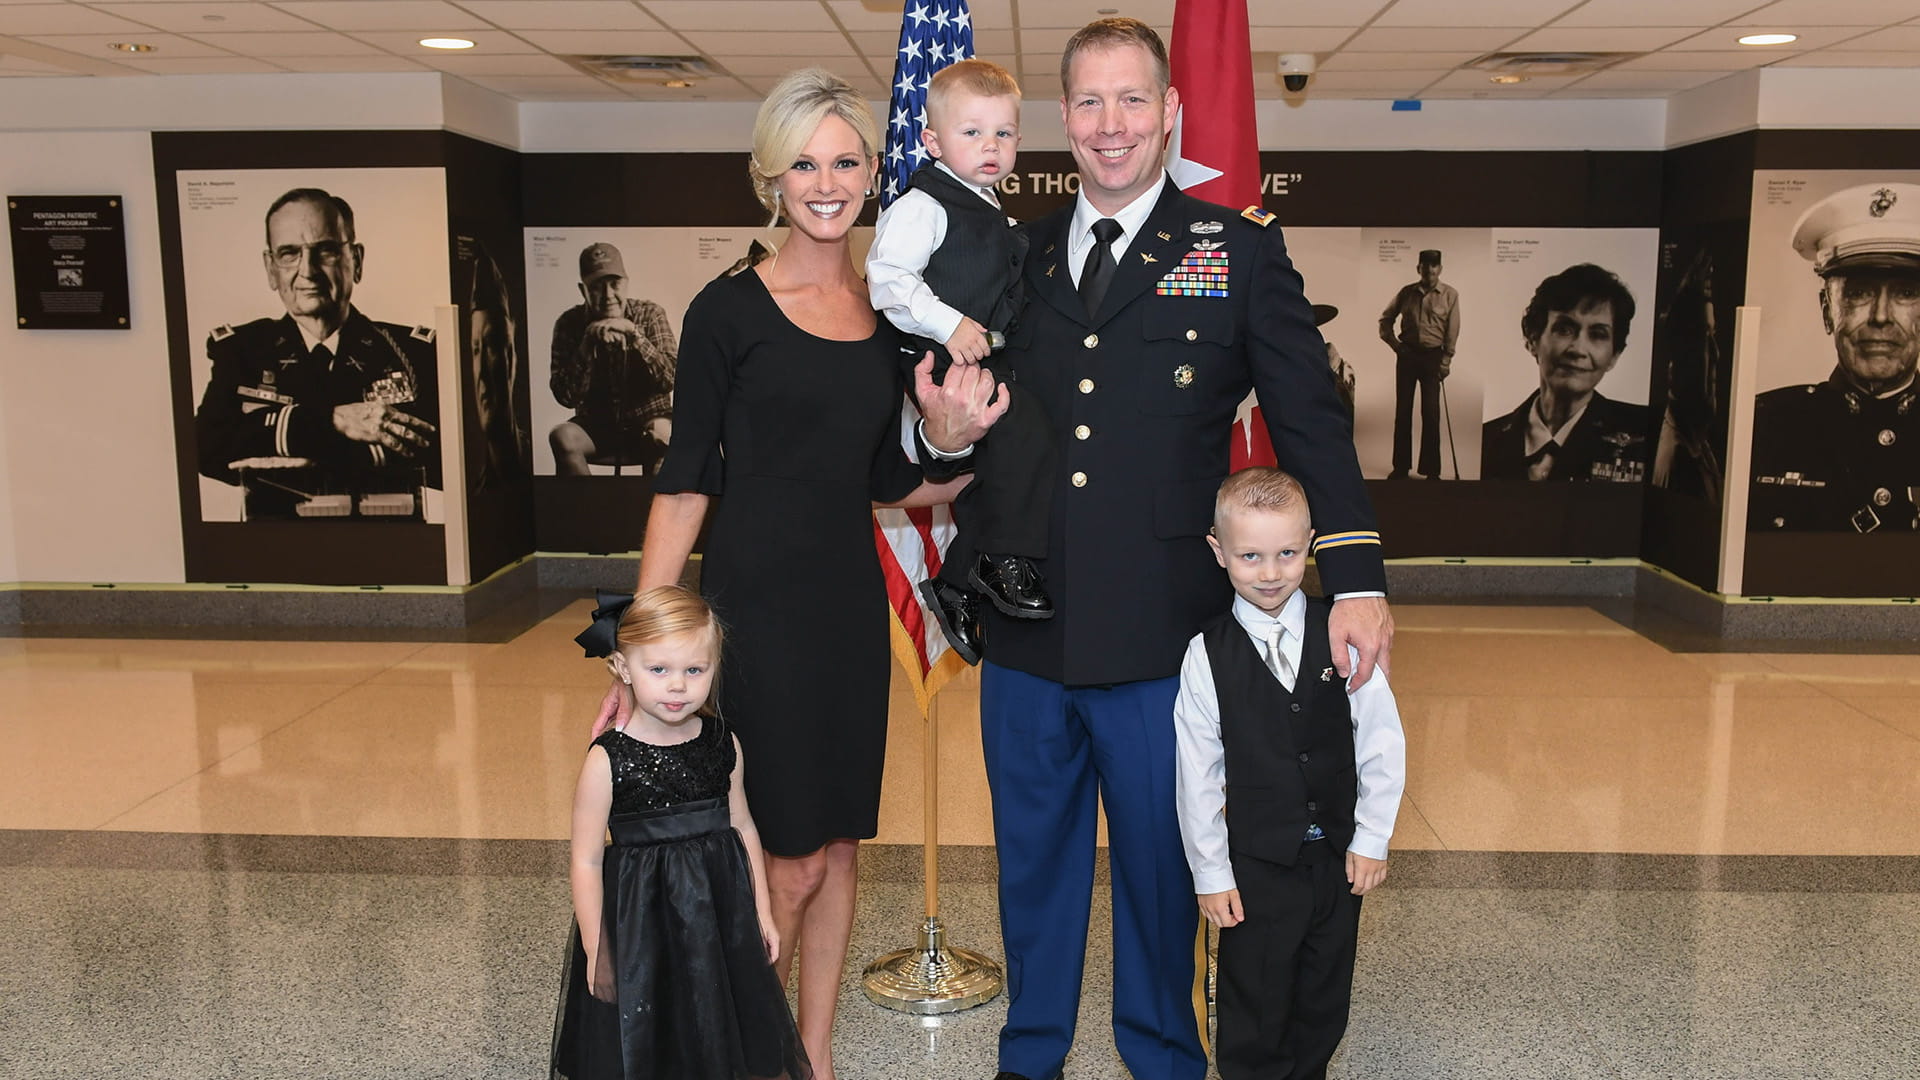 Chadwick Ford in dress uniform with wife and three kids